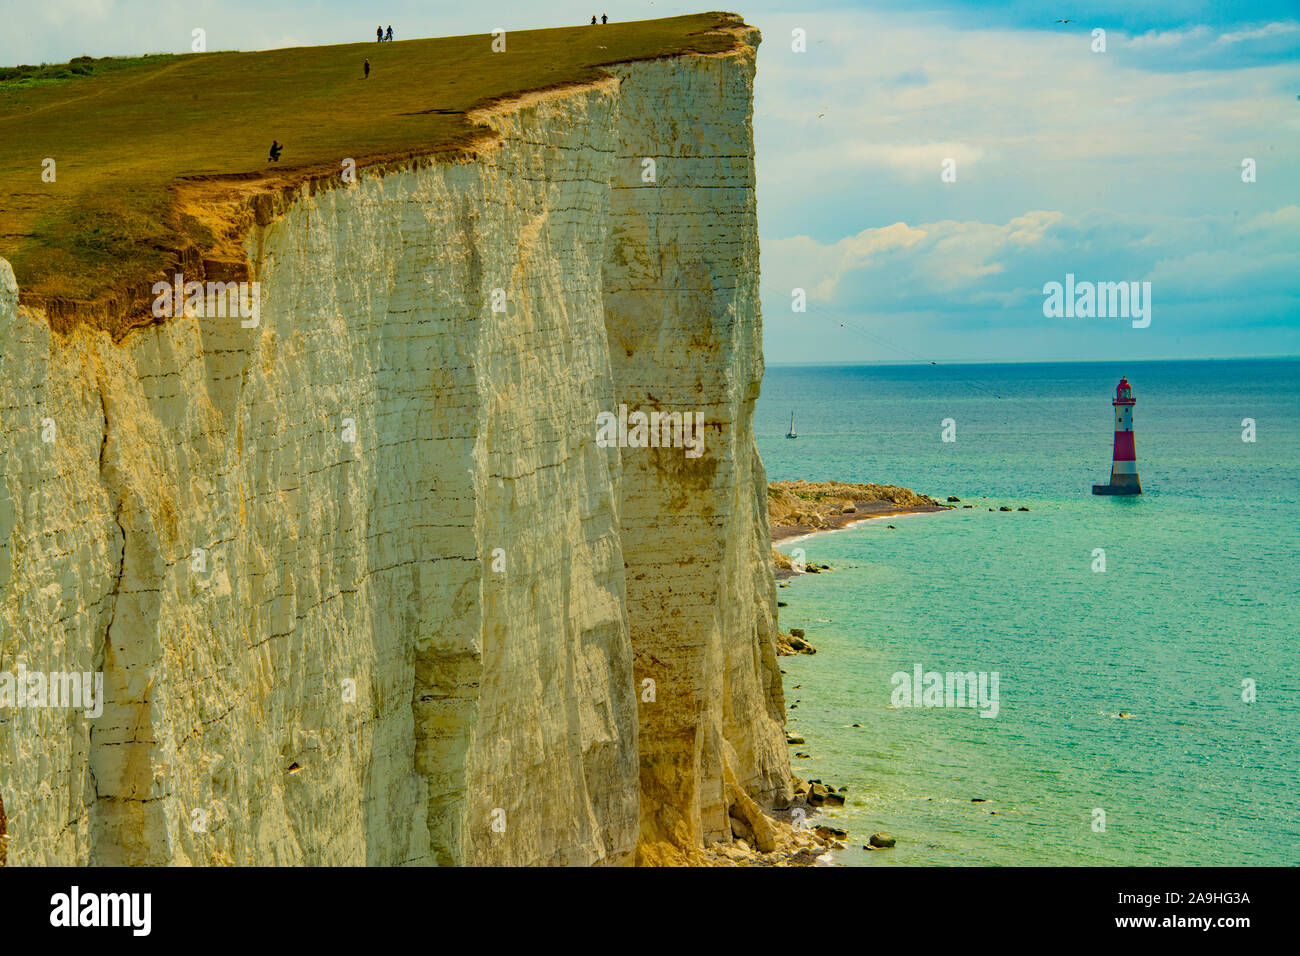 High cliffs at Beachy Head, South Downs National Park, England, United KIngdom, Beachy Head LIghthouse, HIghest sea cliffs in England, English Channel Stock Photo